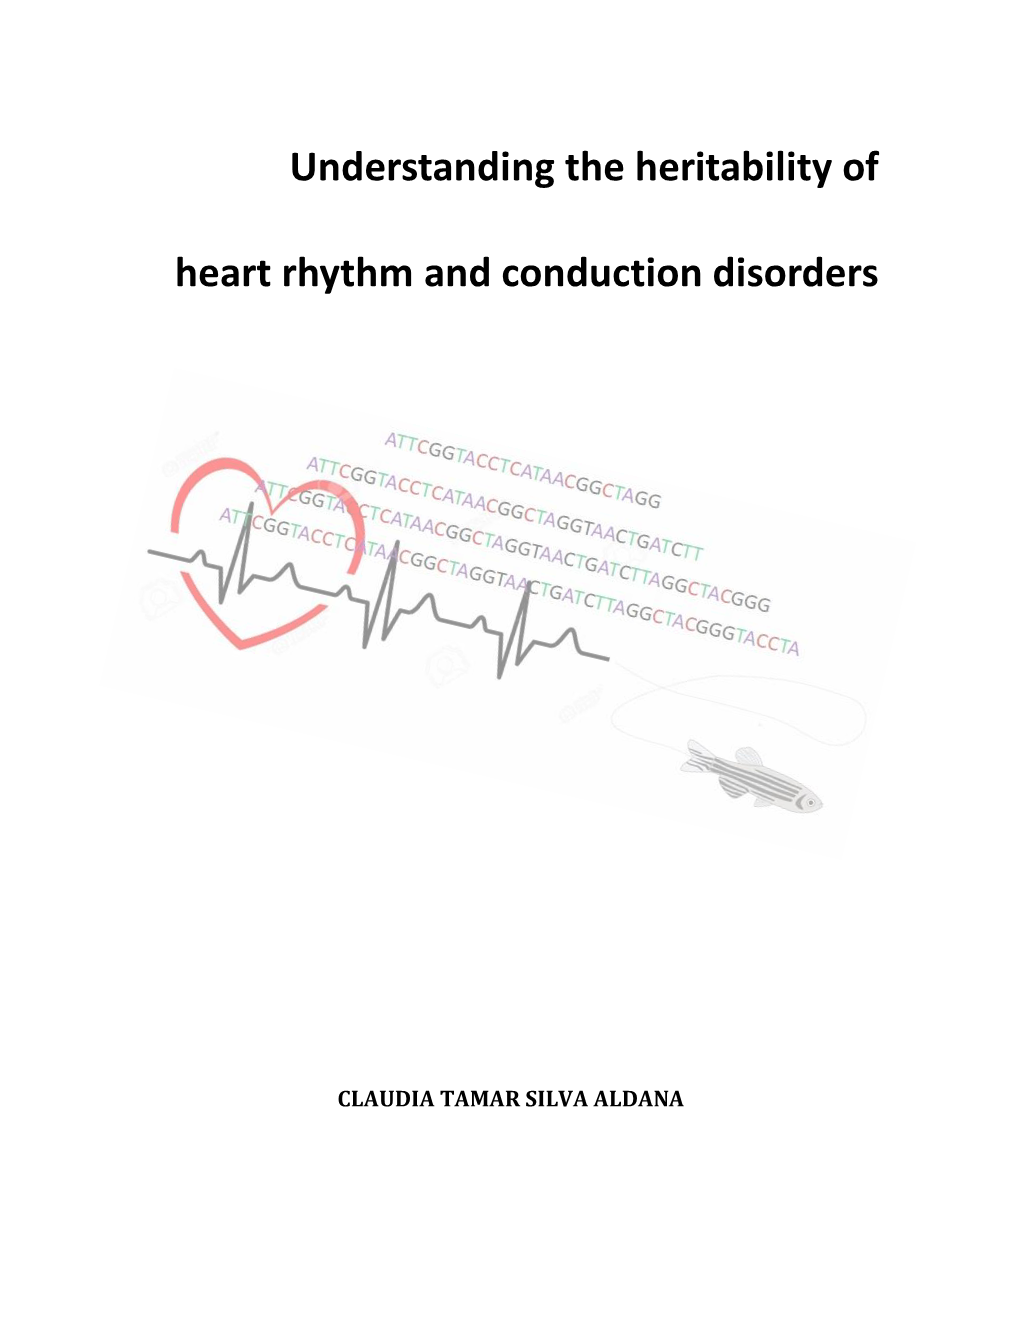 Understanding the Heritability of Heart Rhythm and Conduction Disorders